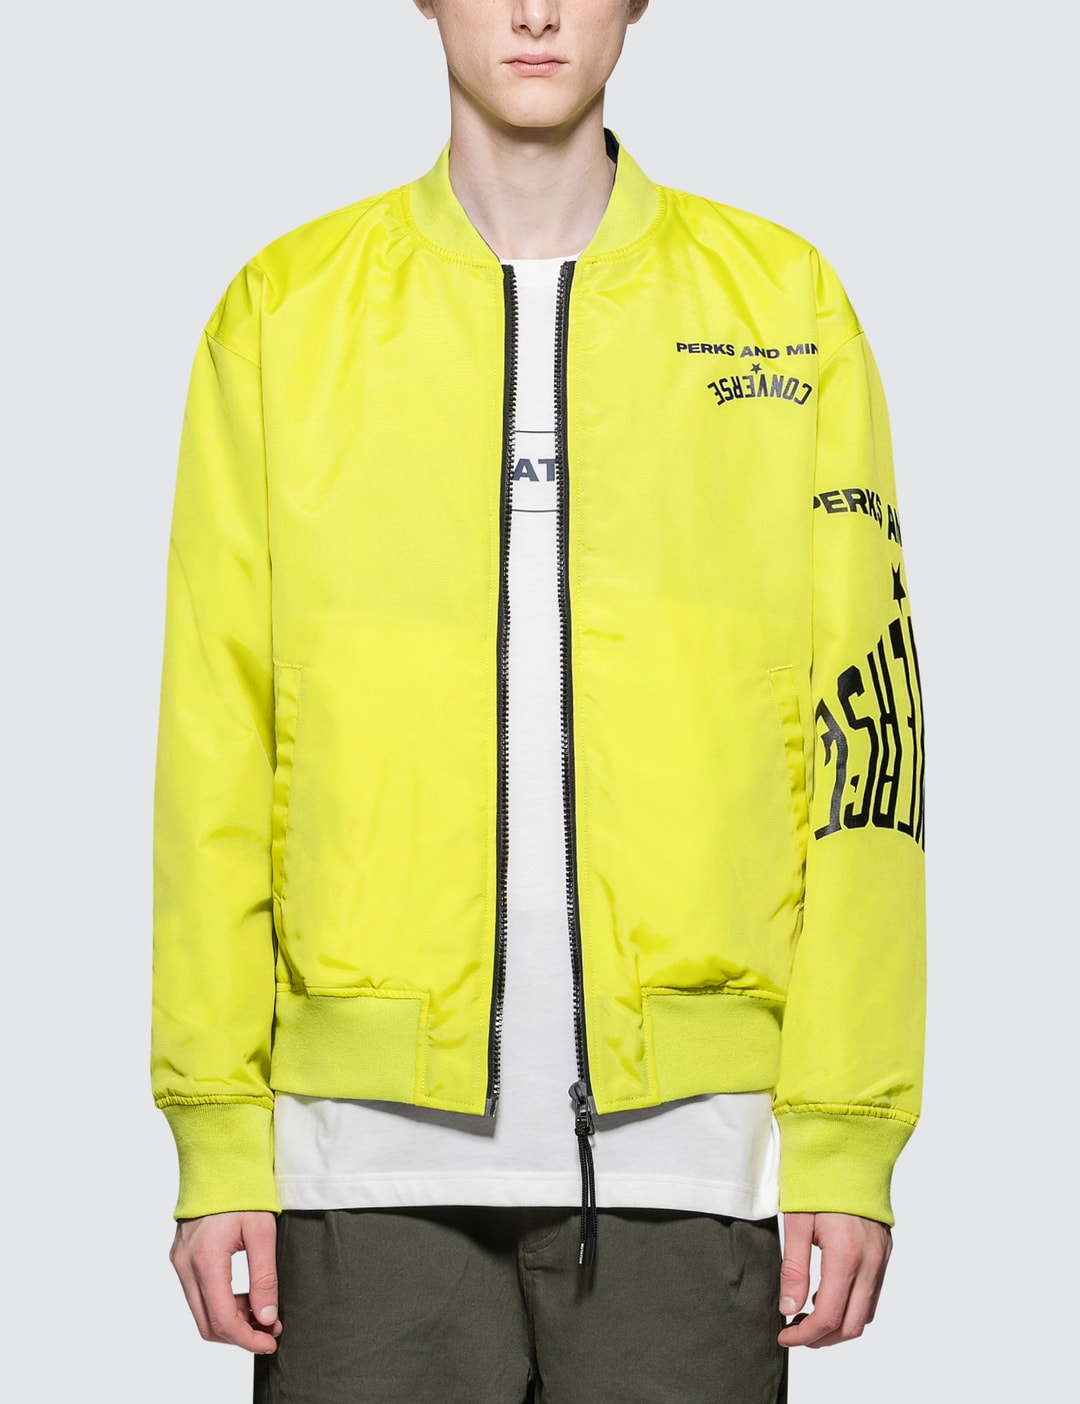 Converse x P.A.M. Bomber Jacket | HBX - Globally Curated Fashion and Lifestyle by